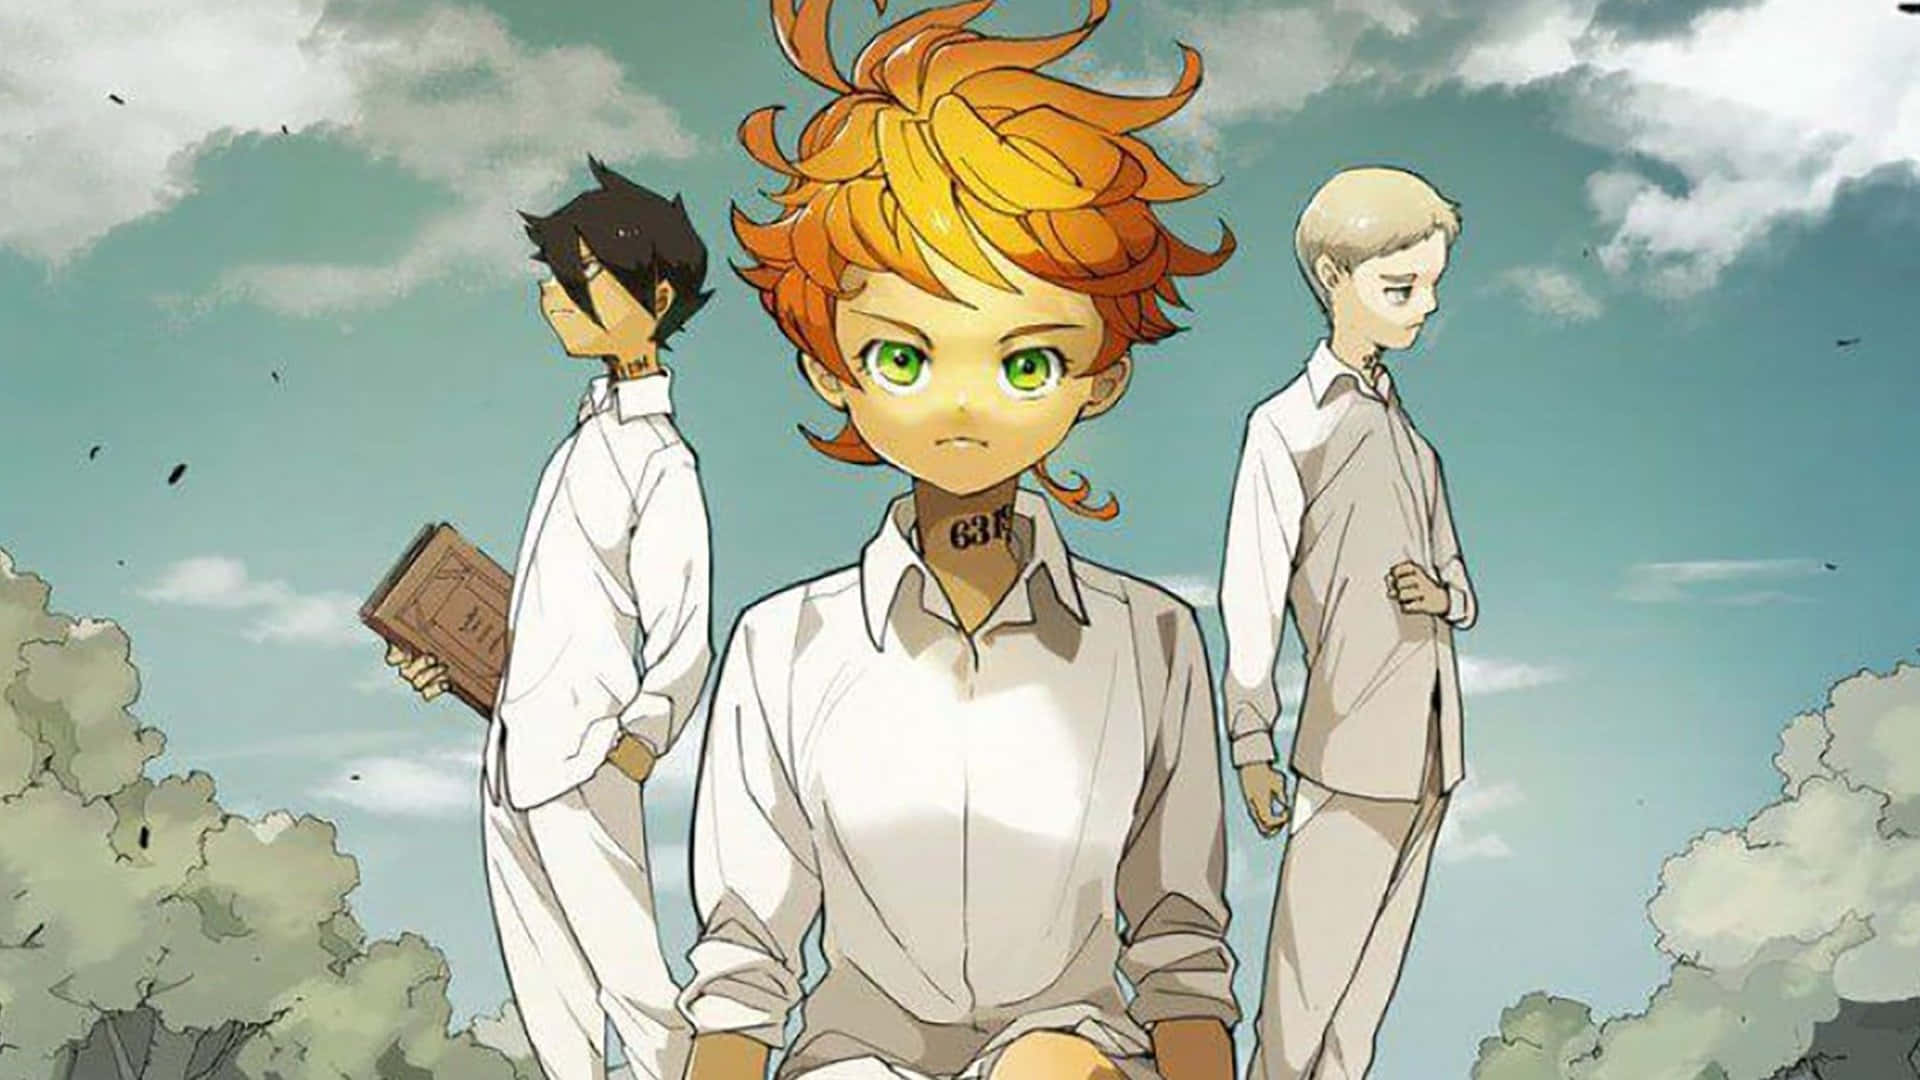 Caption: Intense Ray from The Promised Neverland Wallpaper